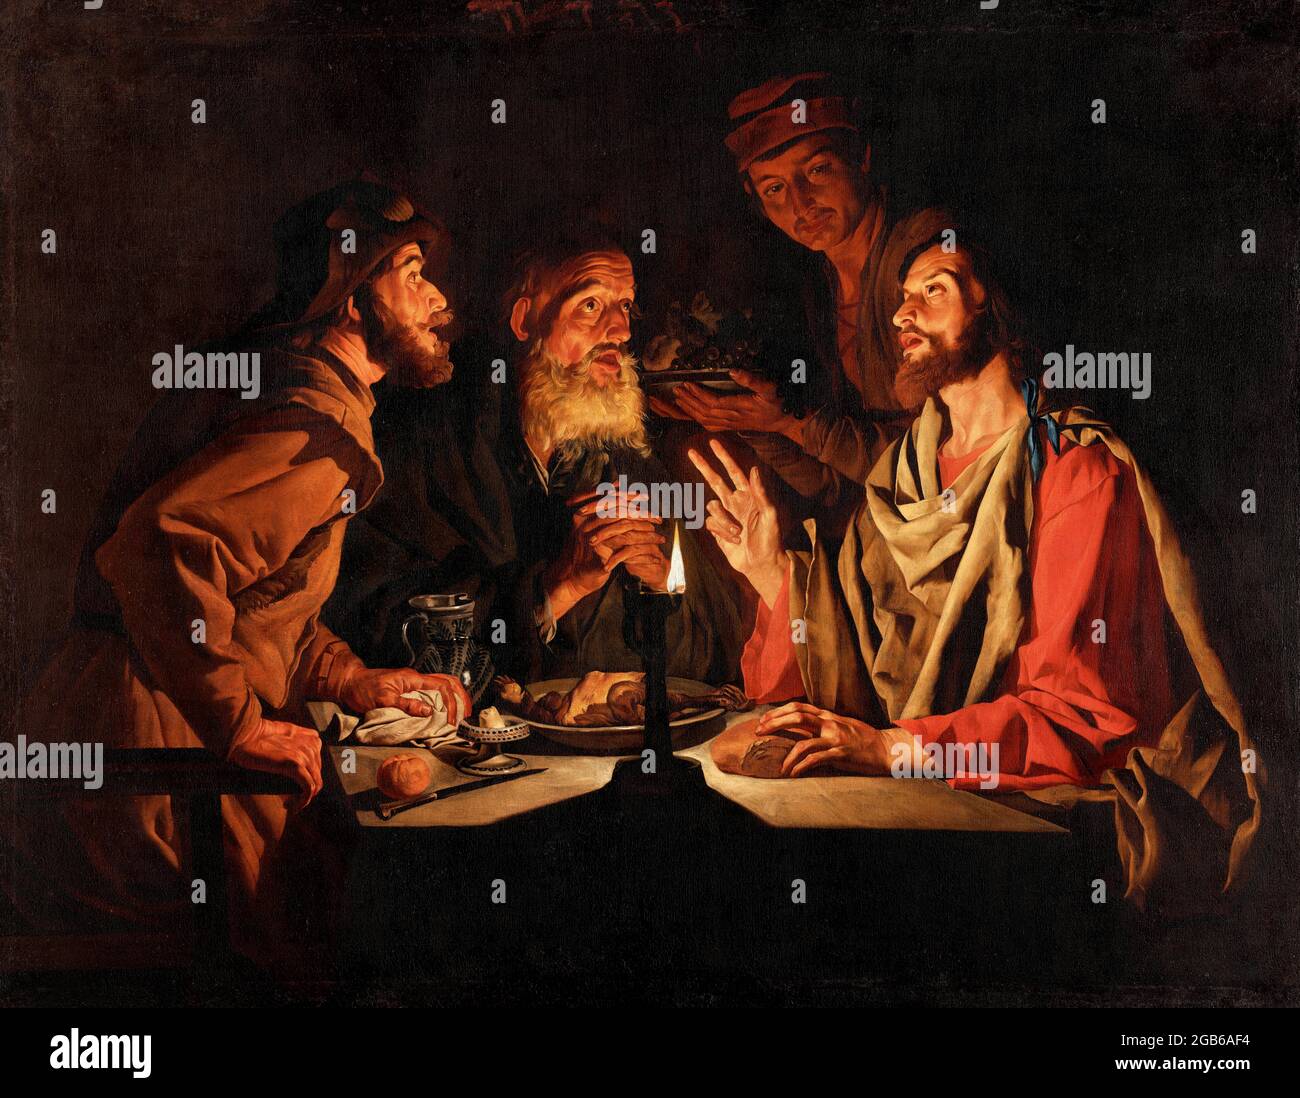 Supper at Emmaus by Matthias Stom (c.1600-c.1652), oil on canvas, c.1635-40 Stock Photo